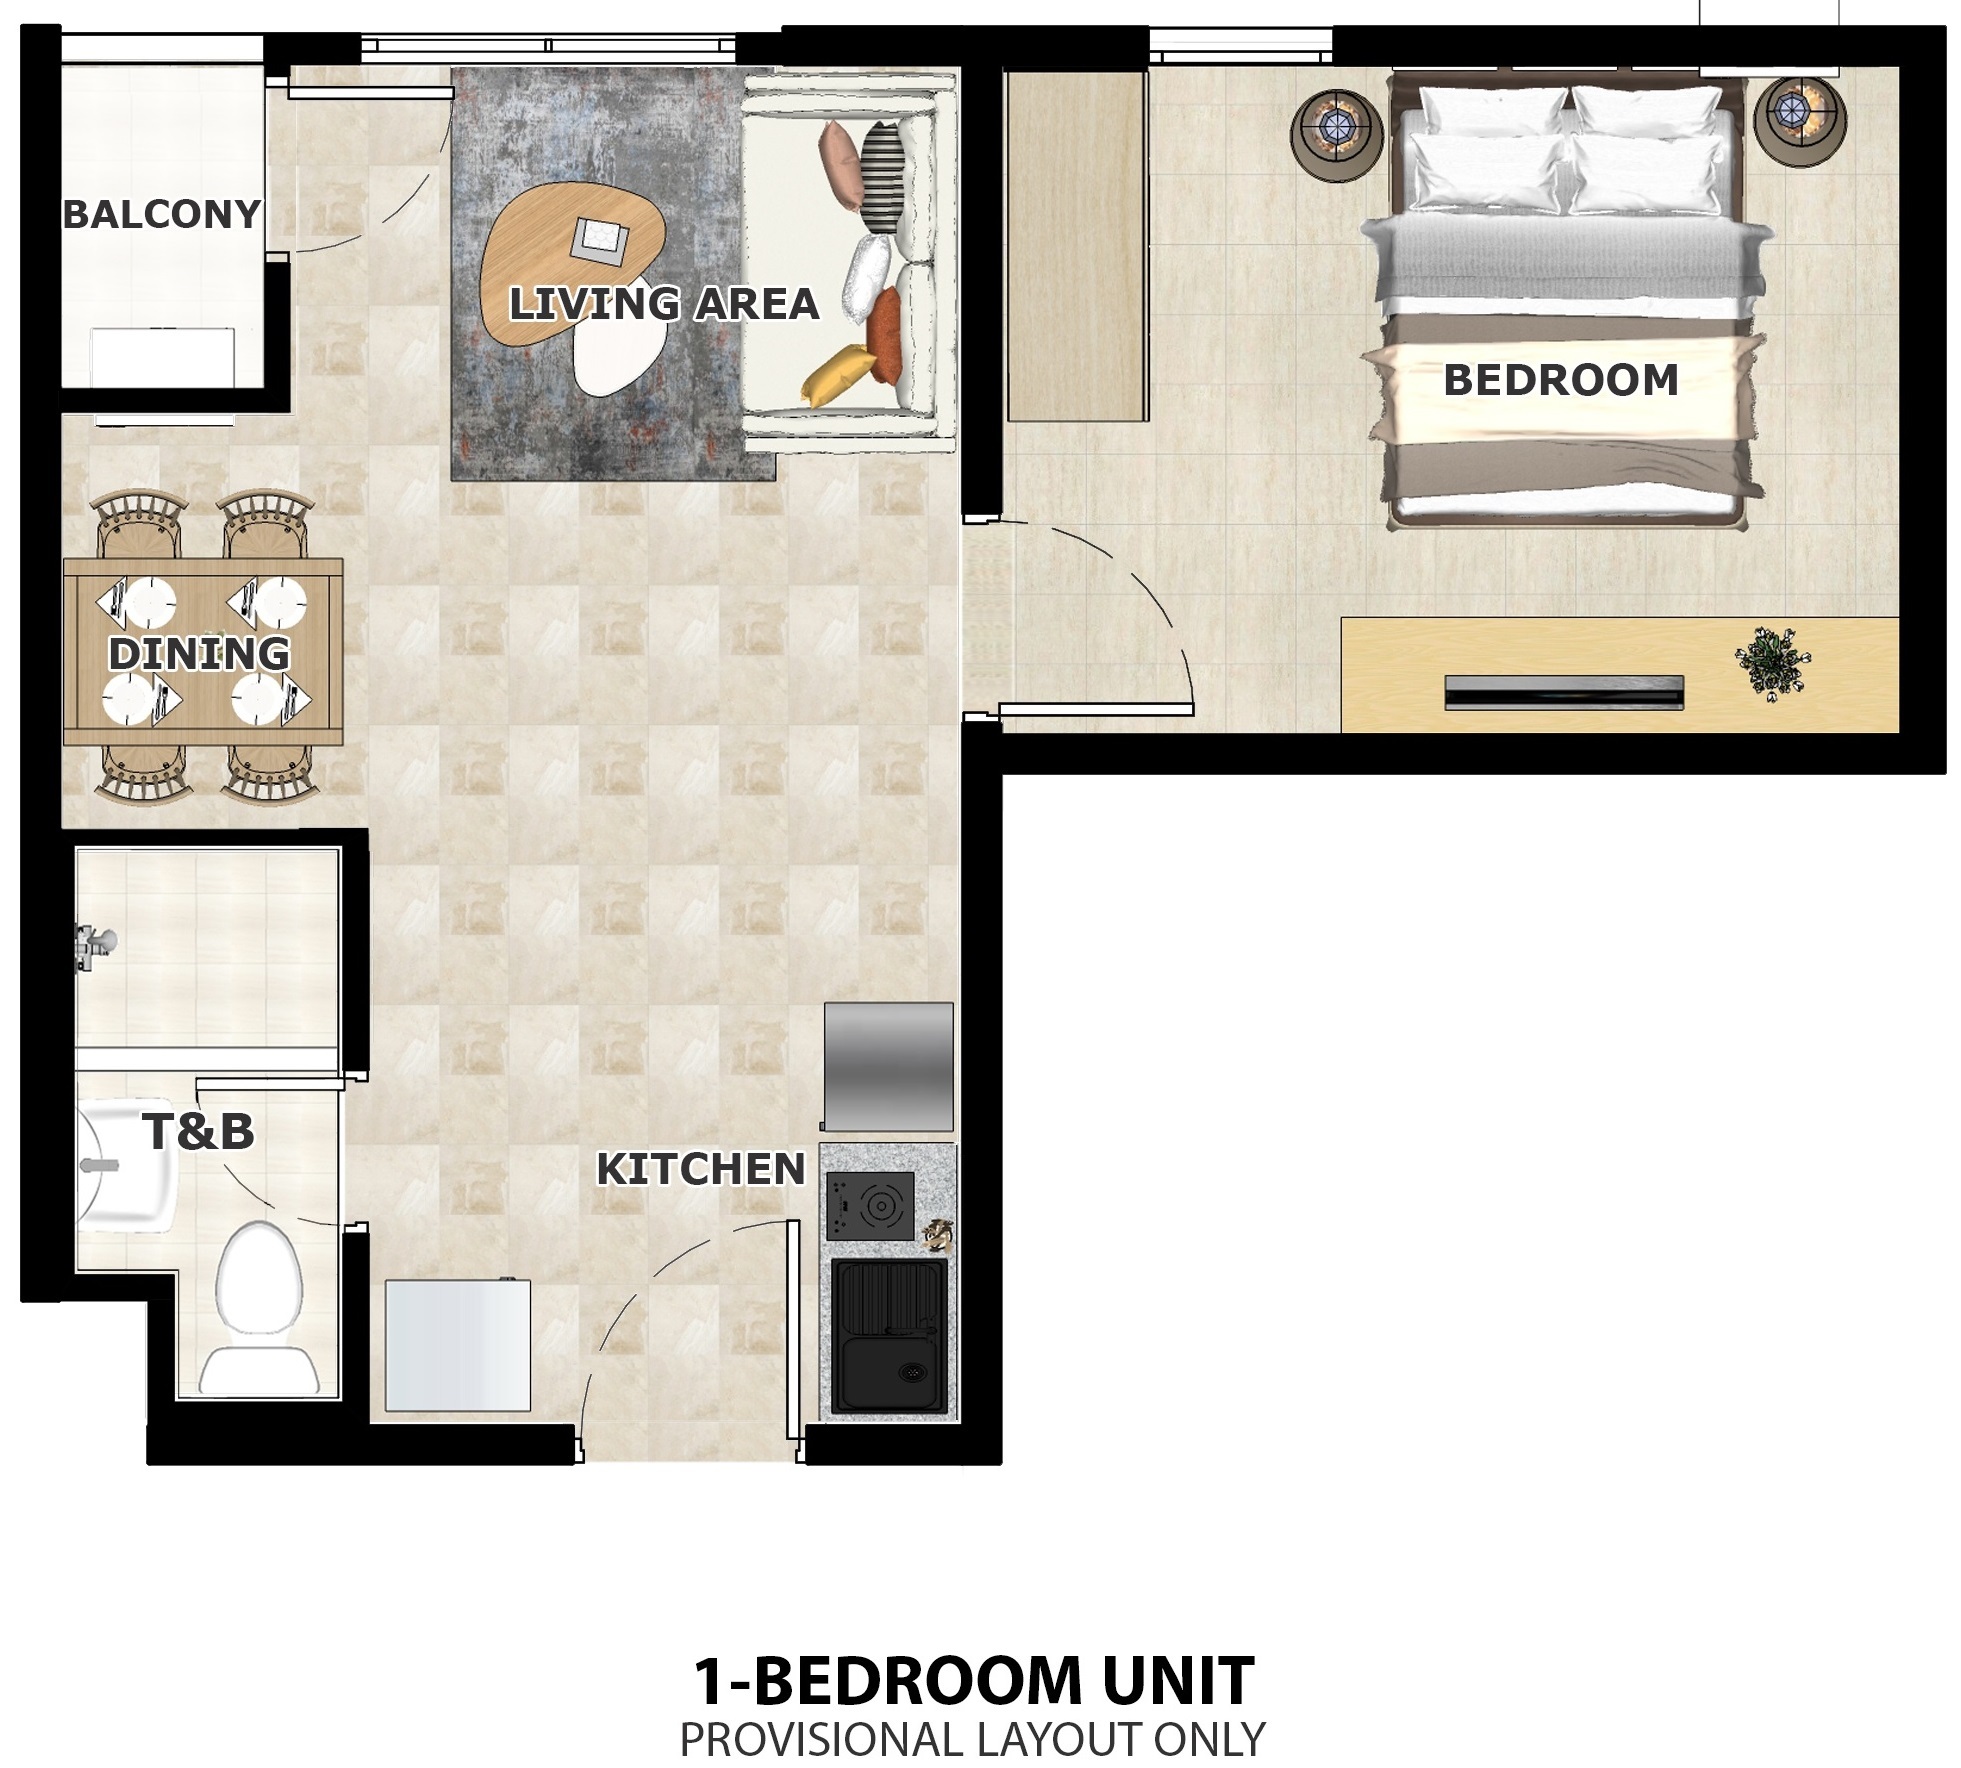 plumera-1br-proposed-layout-2